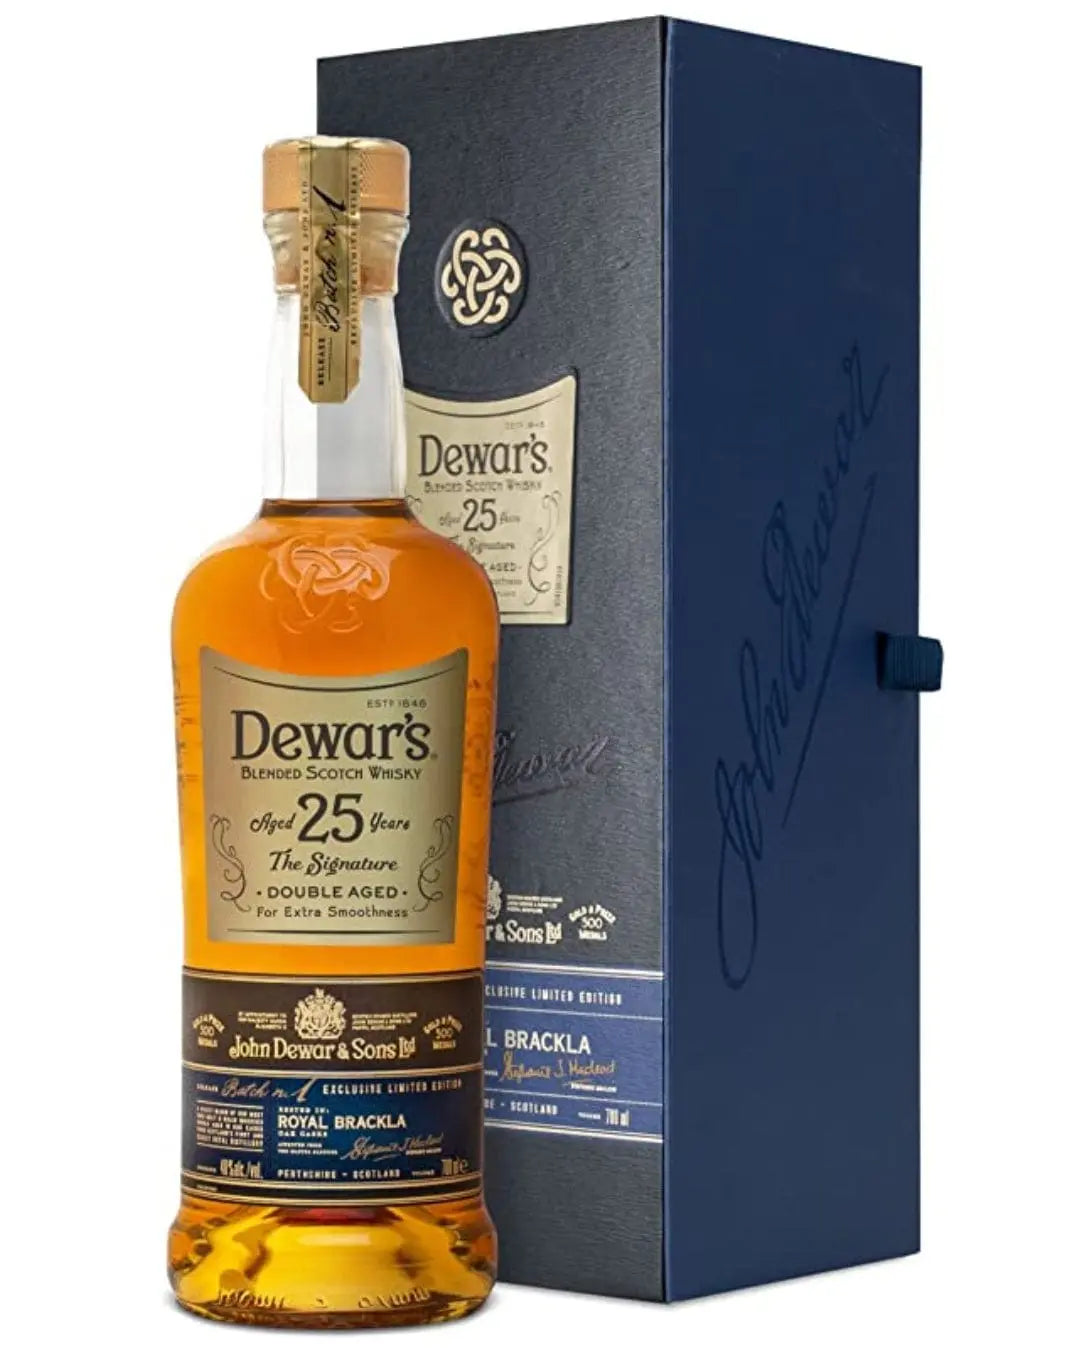 Dewar's Signature 25 Year Old Blended Scotch Whisky, 70 cl Whisky 7640171030487